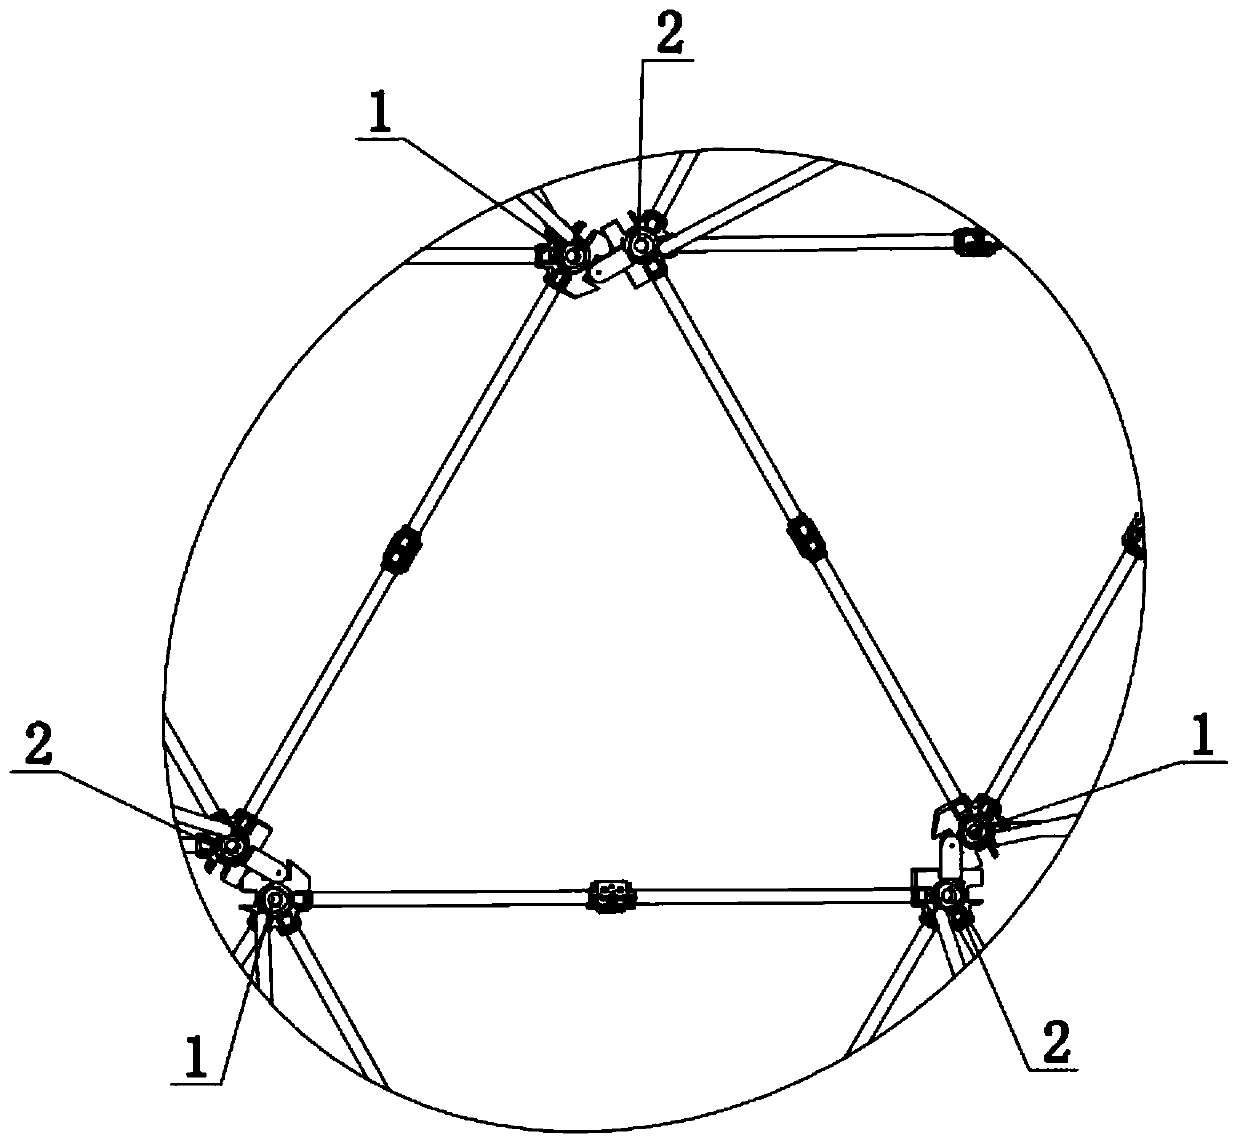 Modular expandable antenna mechanism based on a symmetrical structure tetrahedral combination unit